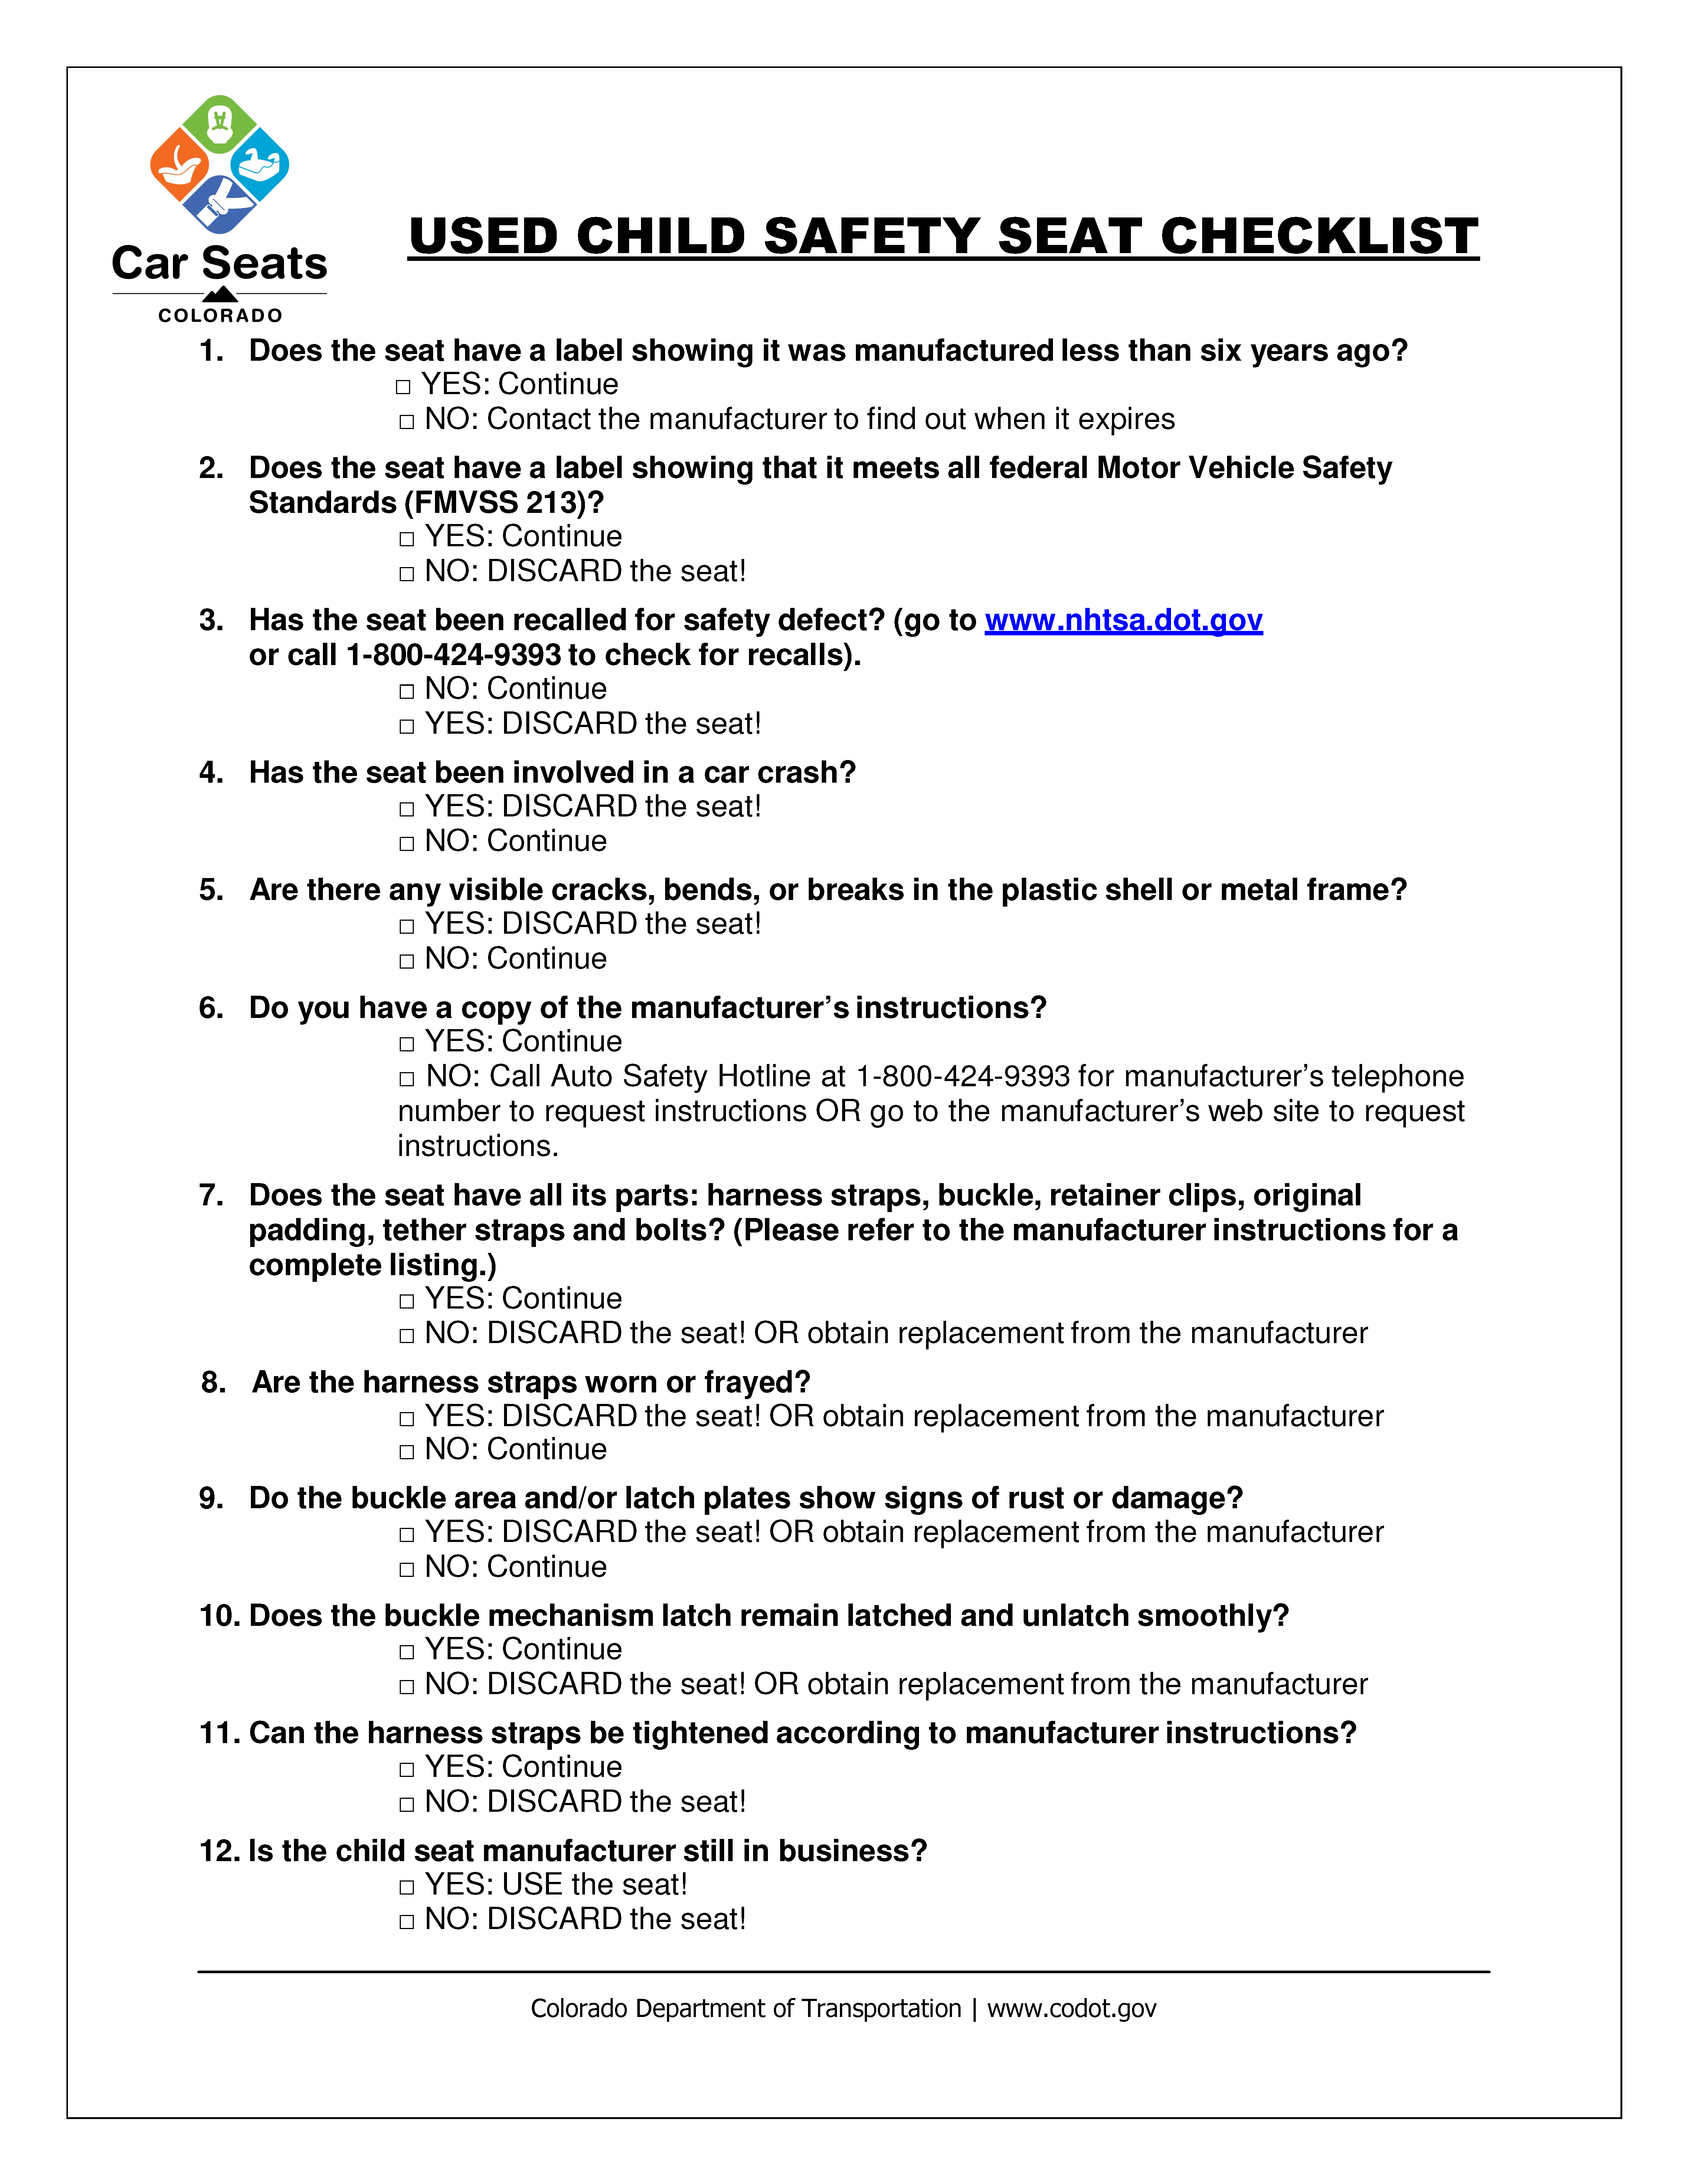 Used Car Seat Checklist detail image